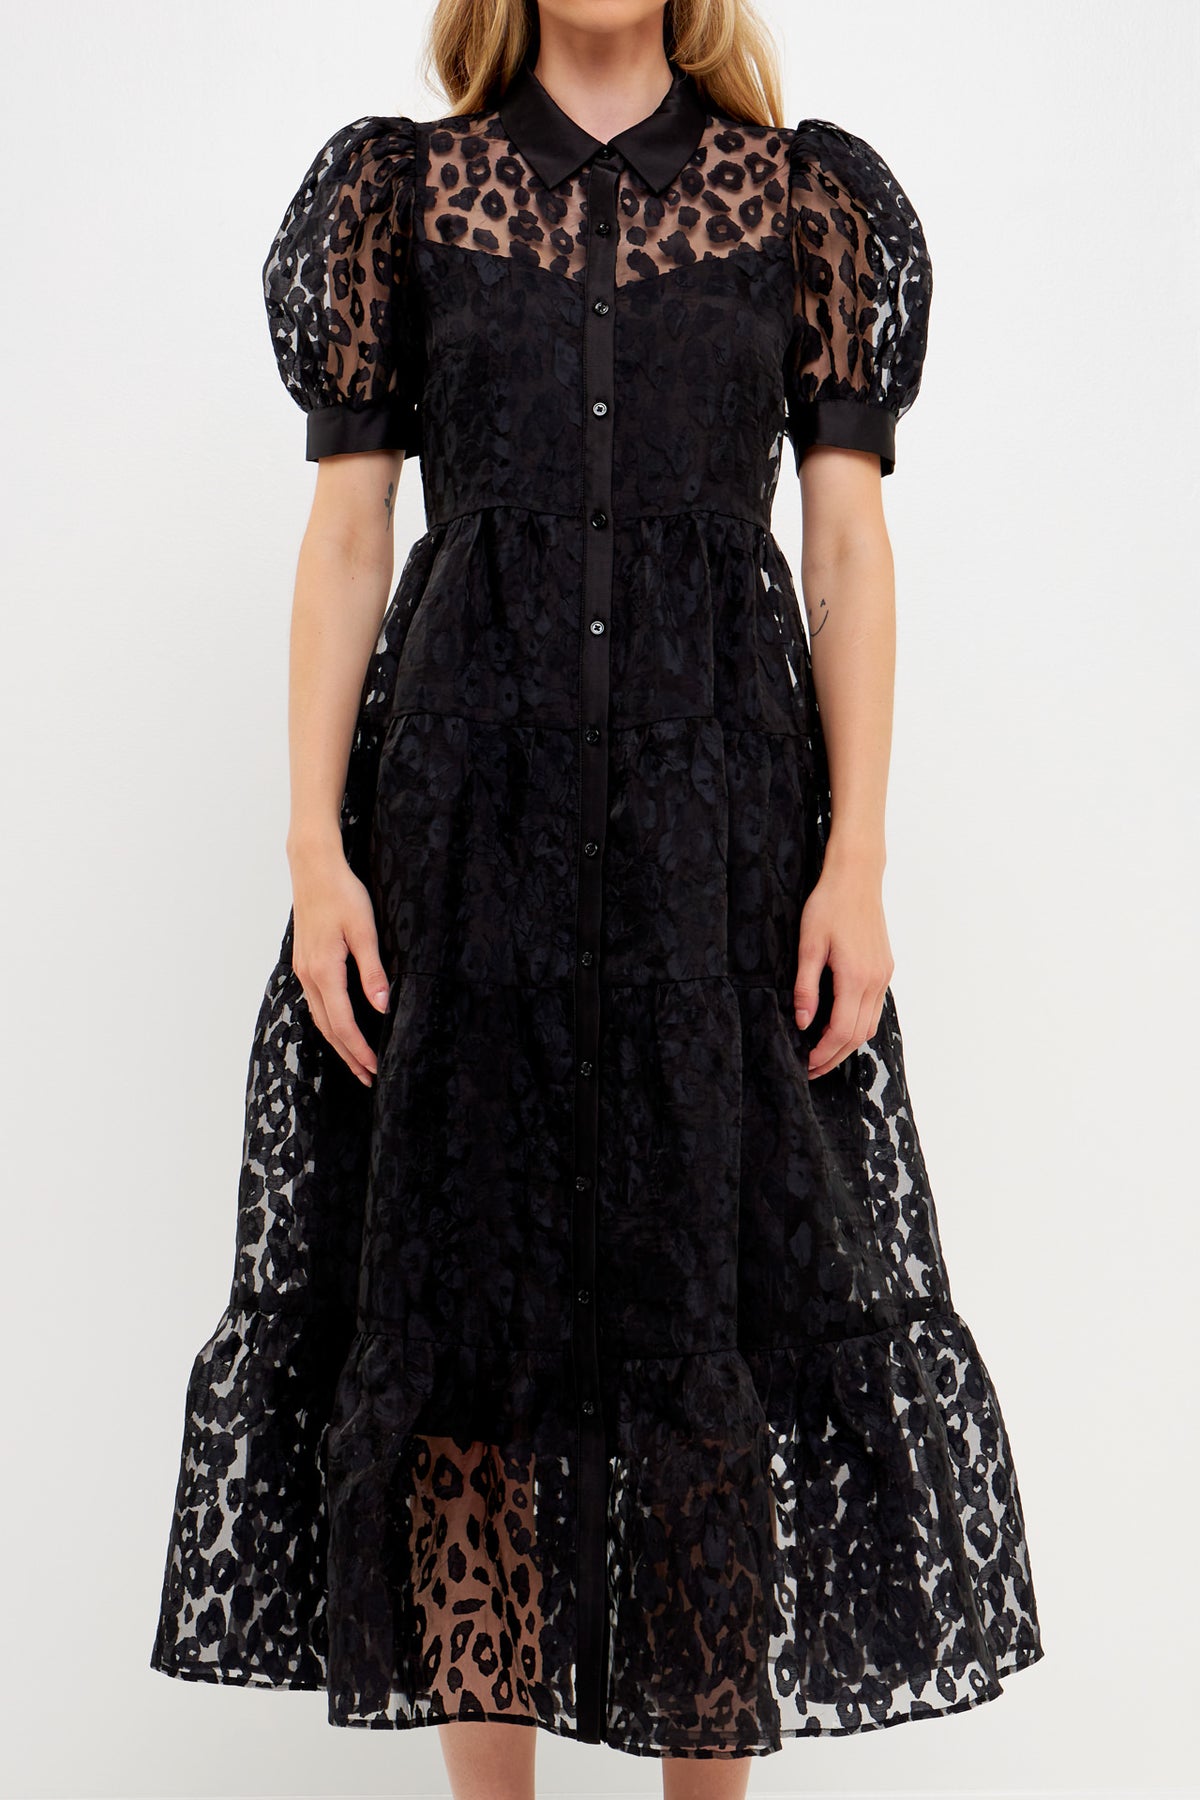 ENGLISH FACTORY - Animal Print Button Up Maxi Dress - DRESSES available at Objectrare